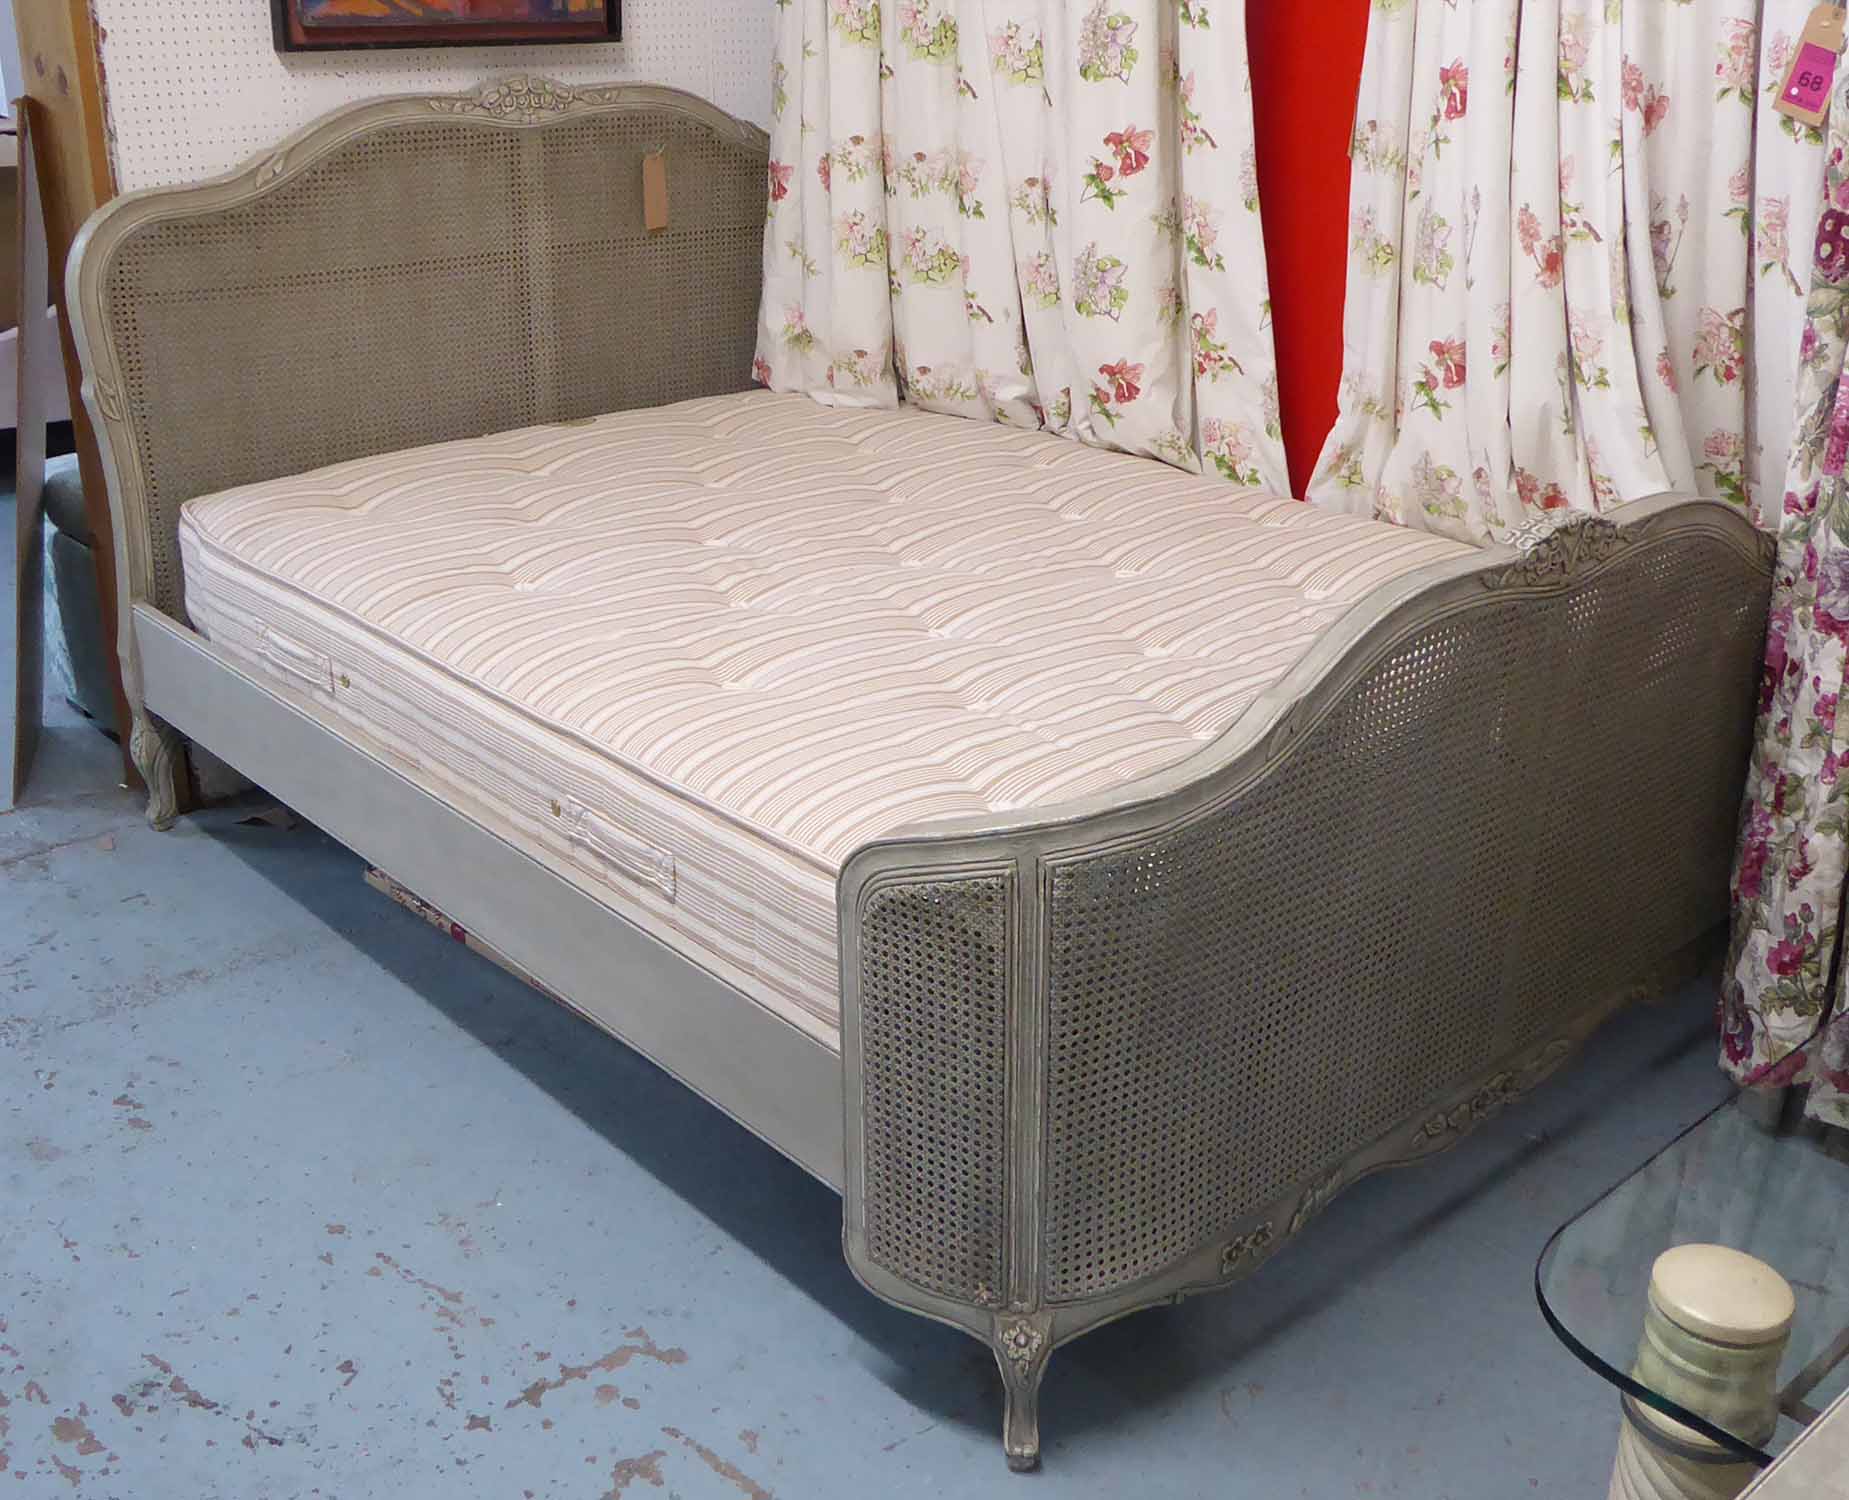 BED FRAME, French style caned grey painted with mattress, 167cm x 128cm H.